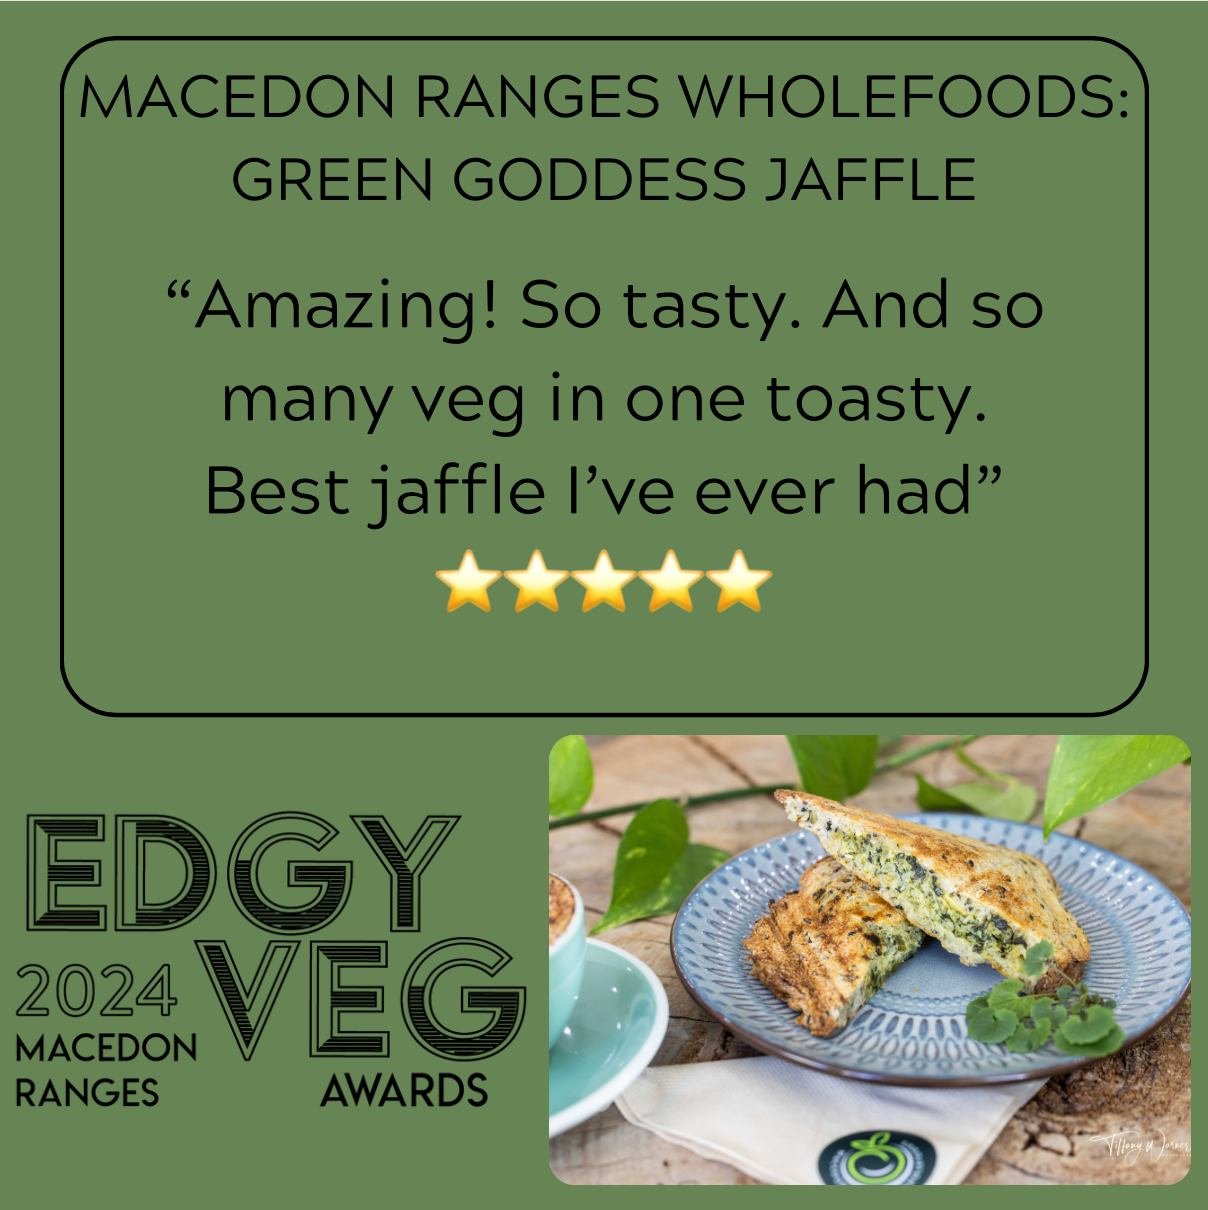 Who knew the humble jaffle could be this good! So many positive reviews are rolling in for Macedon Ranges Wholefoods' Green Goddess Jaffle! 
We highly recommend you head down there and have a bite to eat before your time runs out. Make sure you rate 